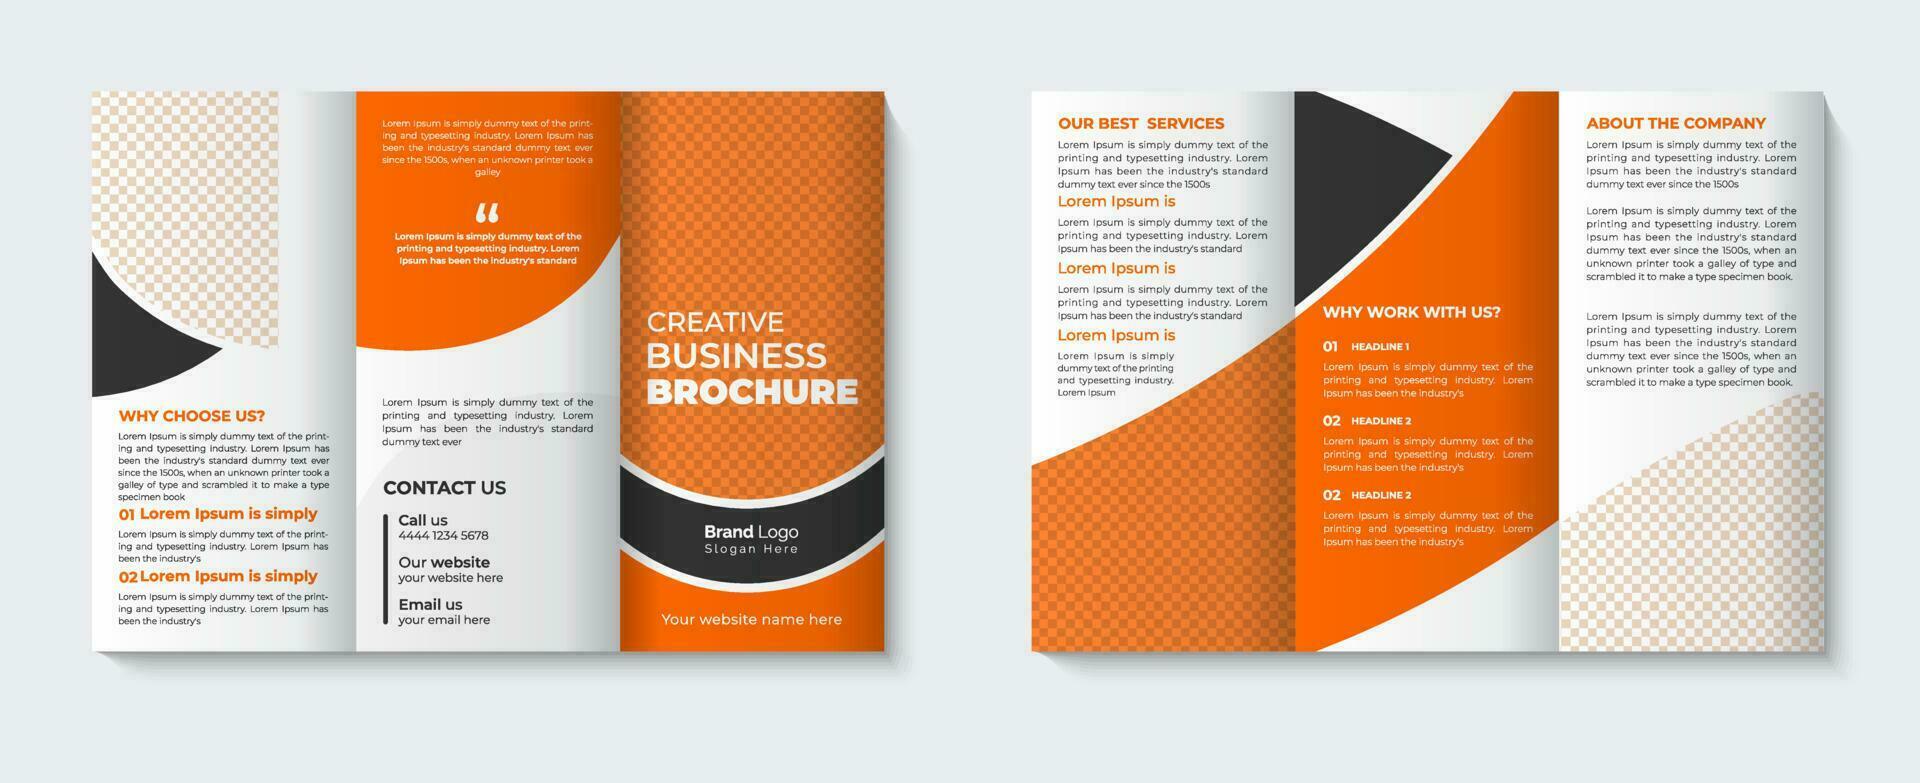 Brochure design with modern tri fold company booklet template pro download vector